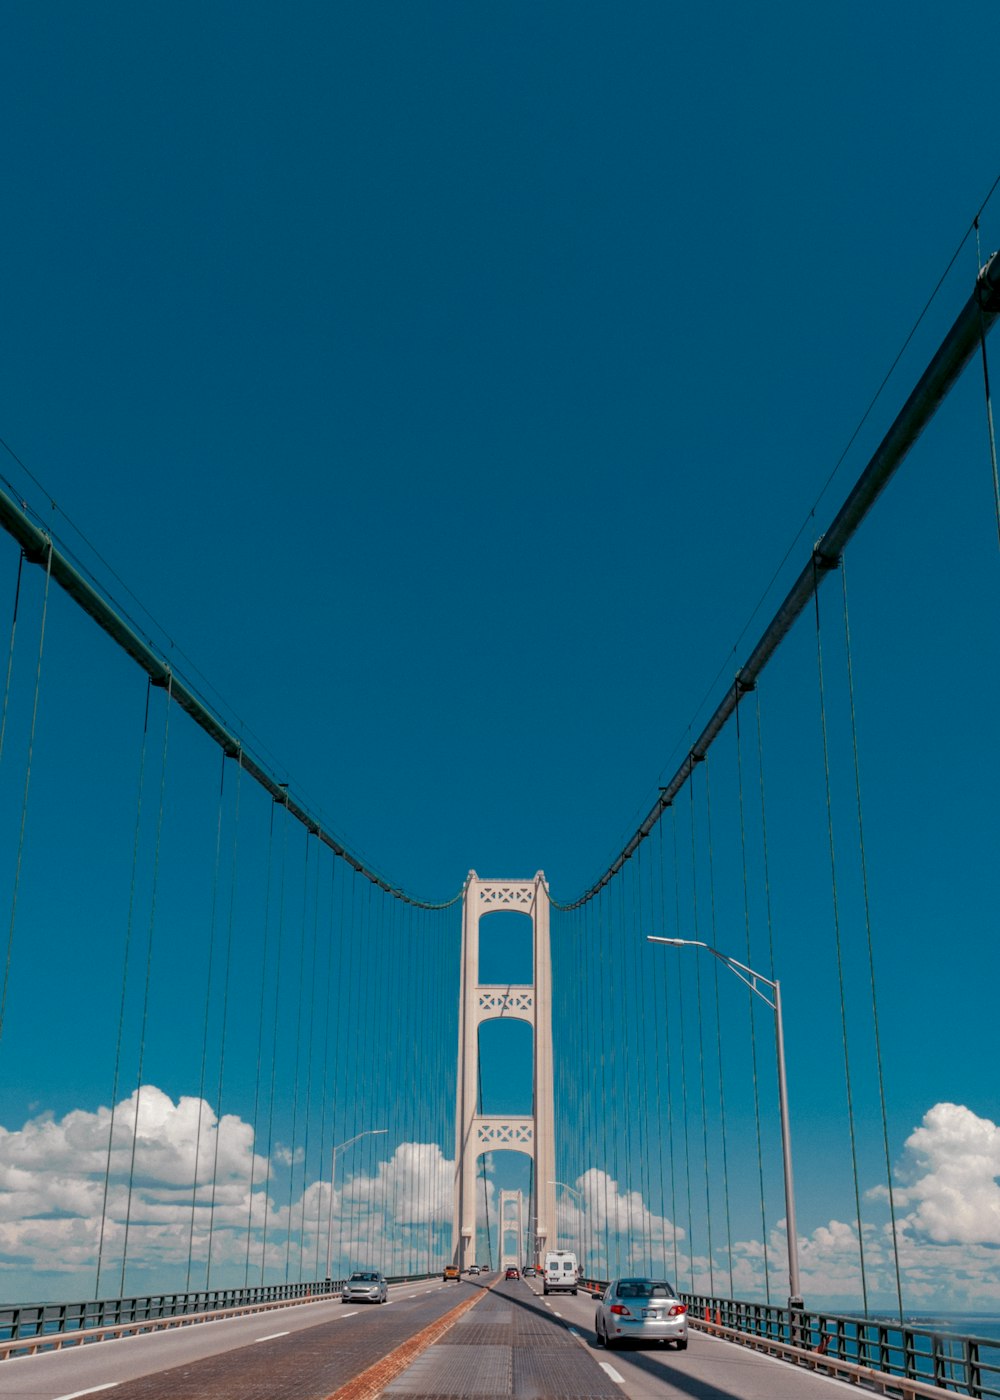 a view of a bridge from a car on the road